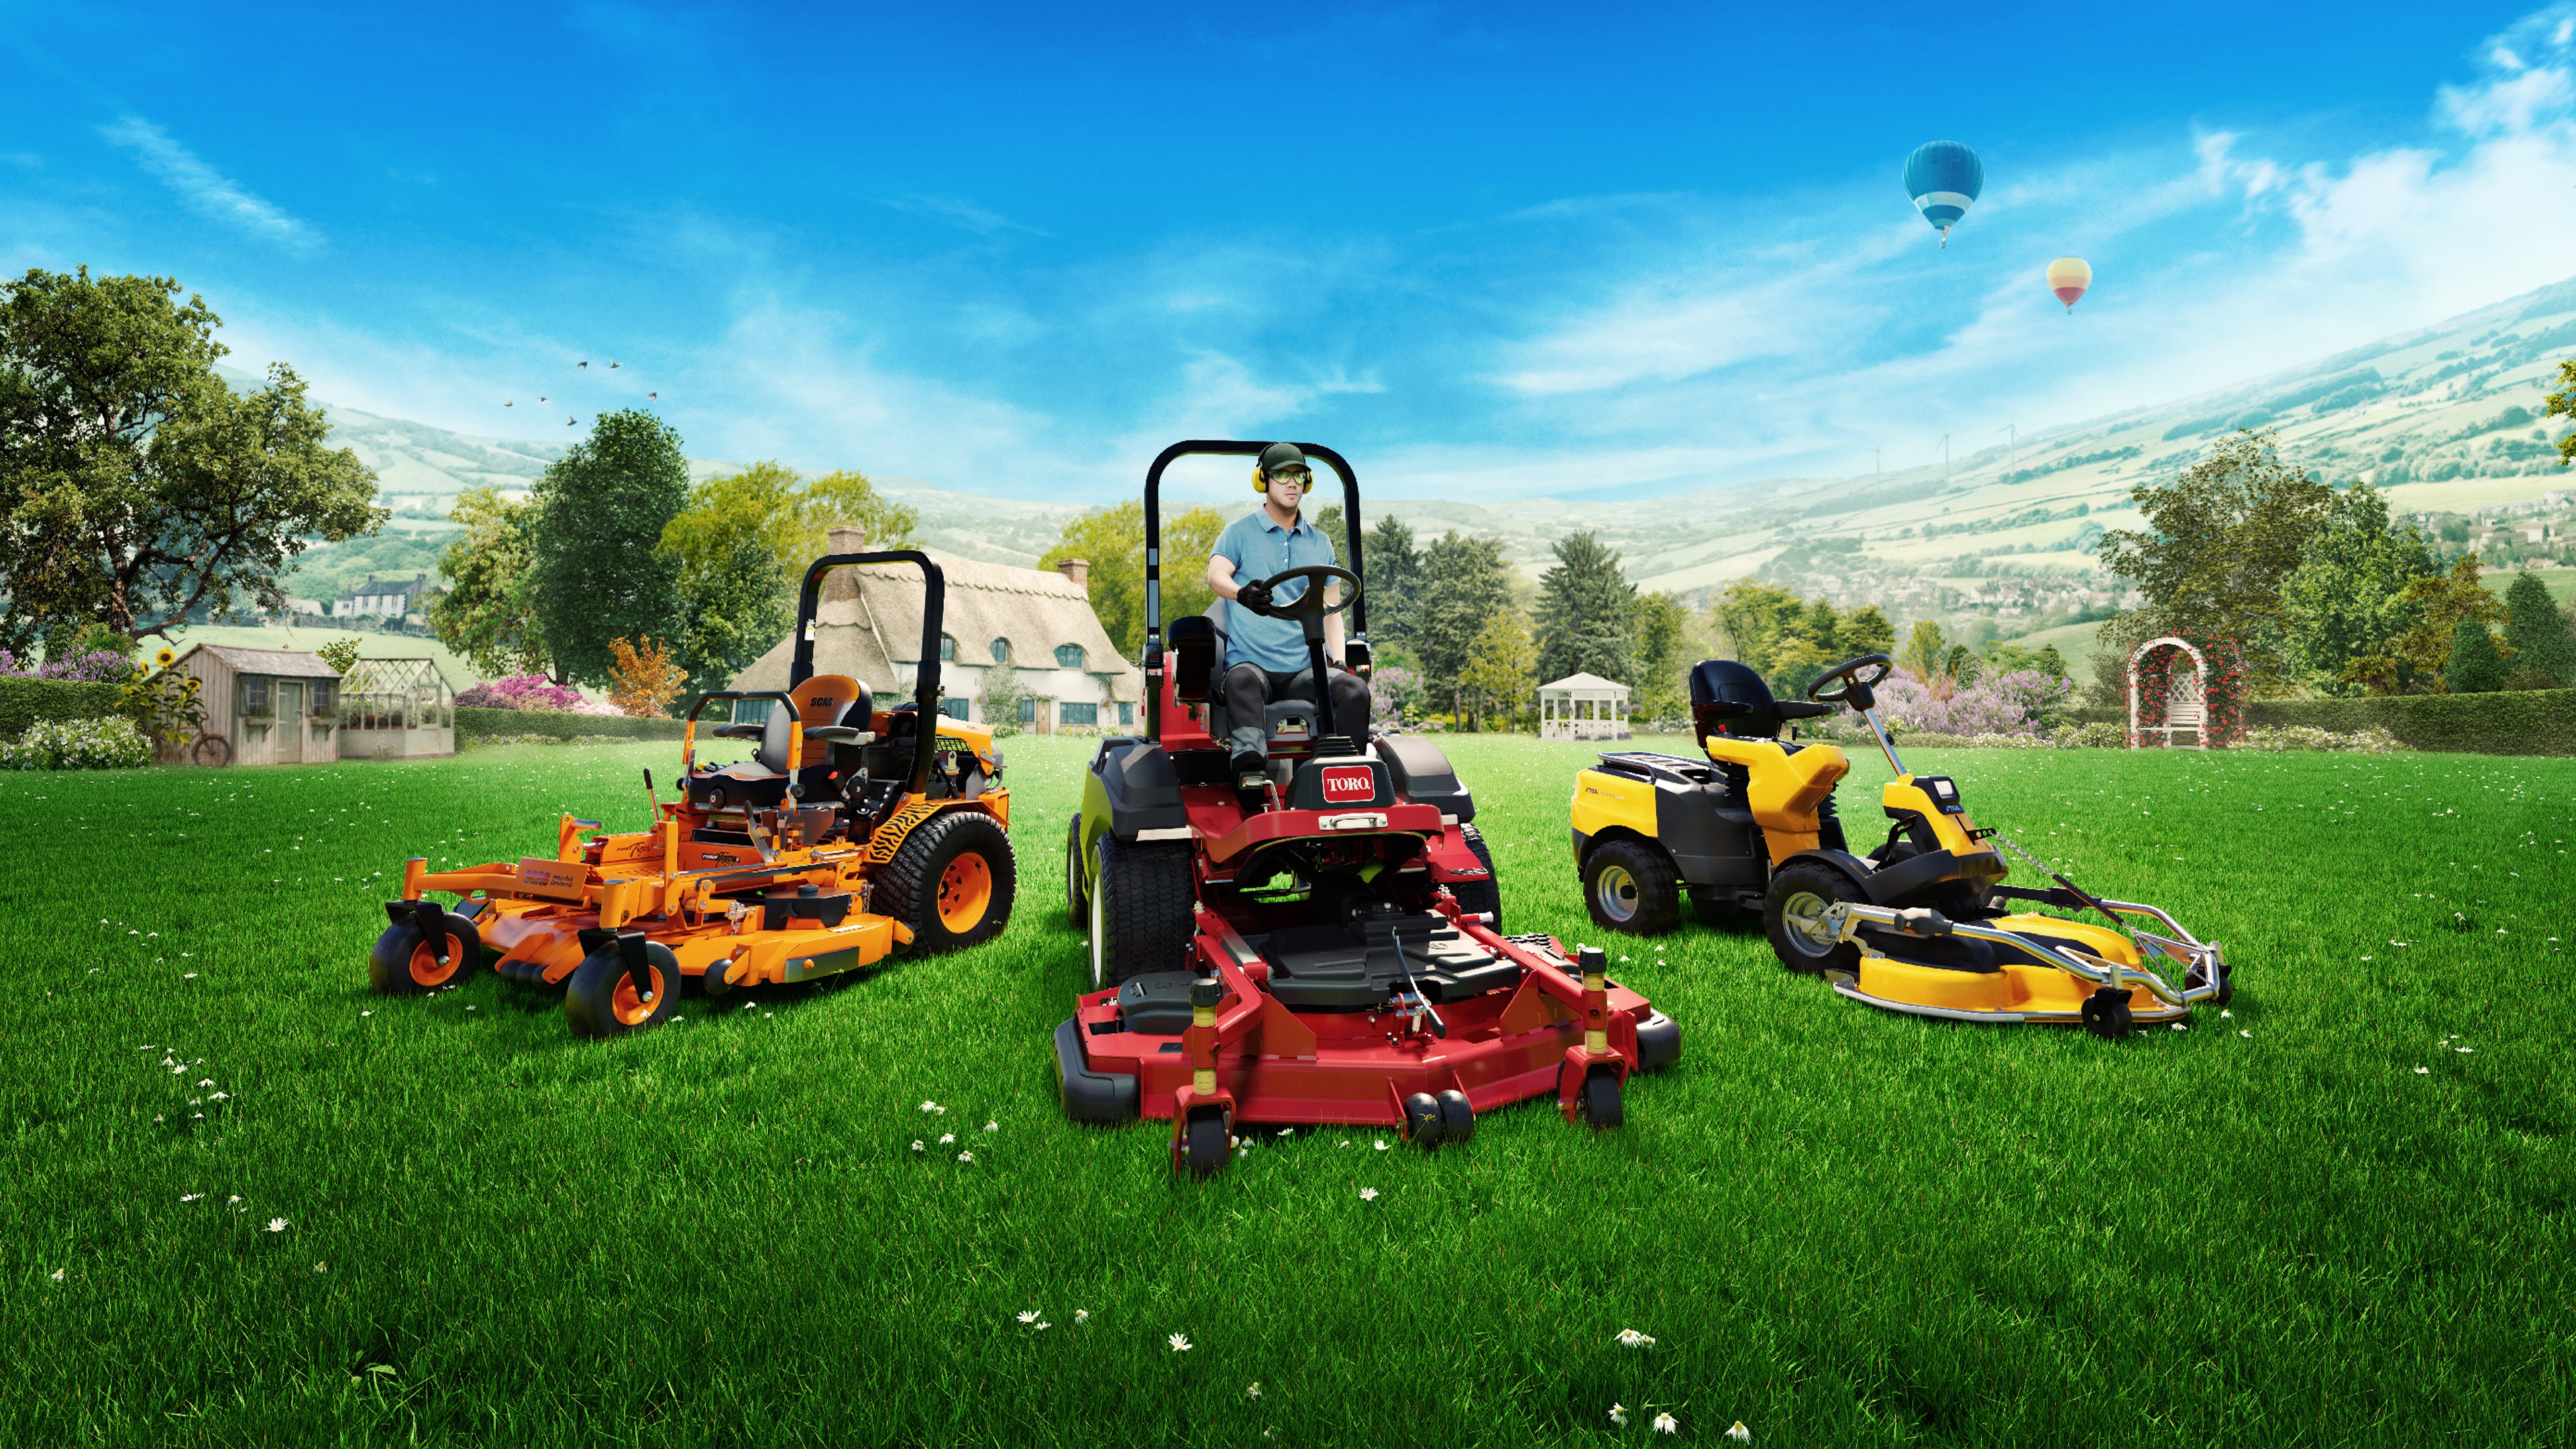 Lawn Mowing Simulator PS4 & PS5 (Simplified Chinese, English, Korean, Japanese, Traditional Chinese)